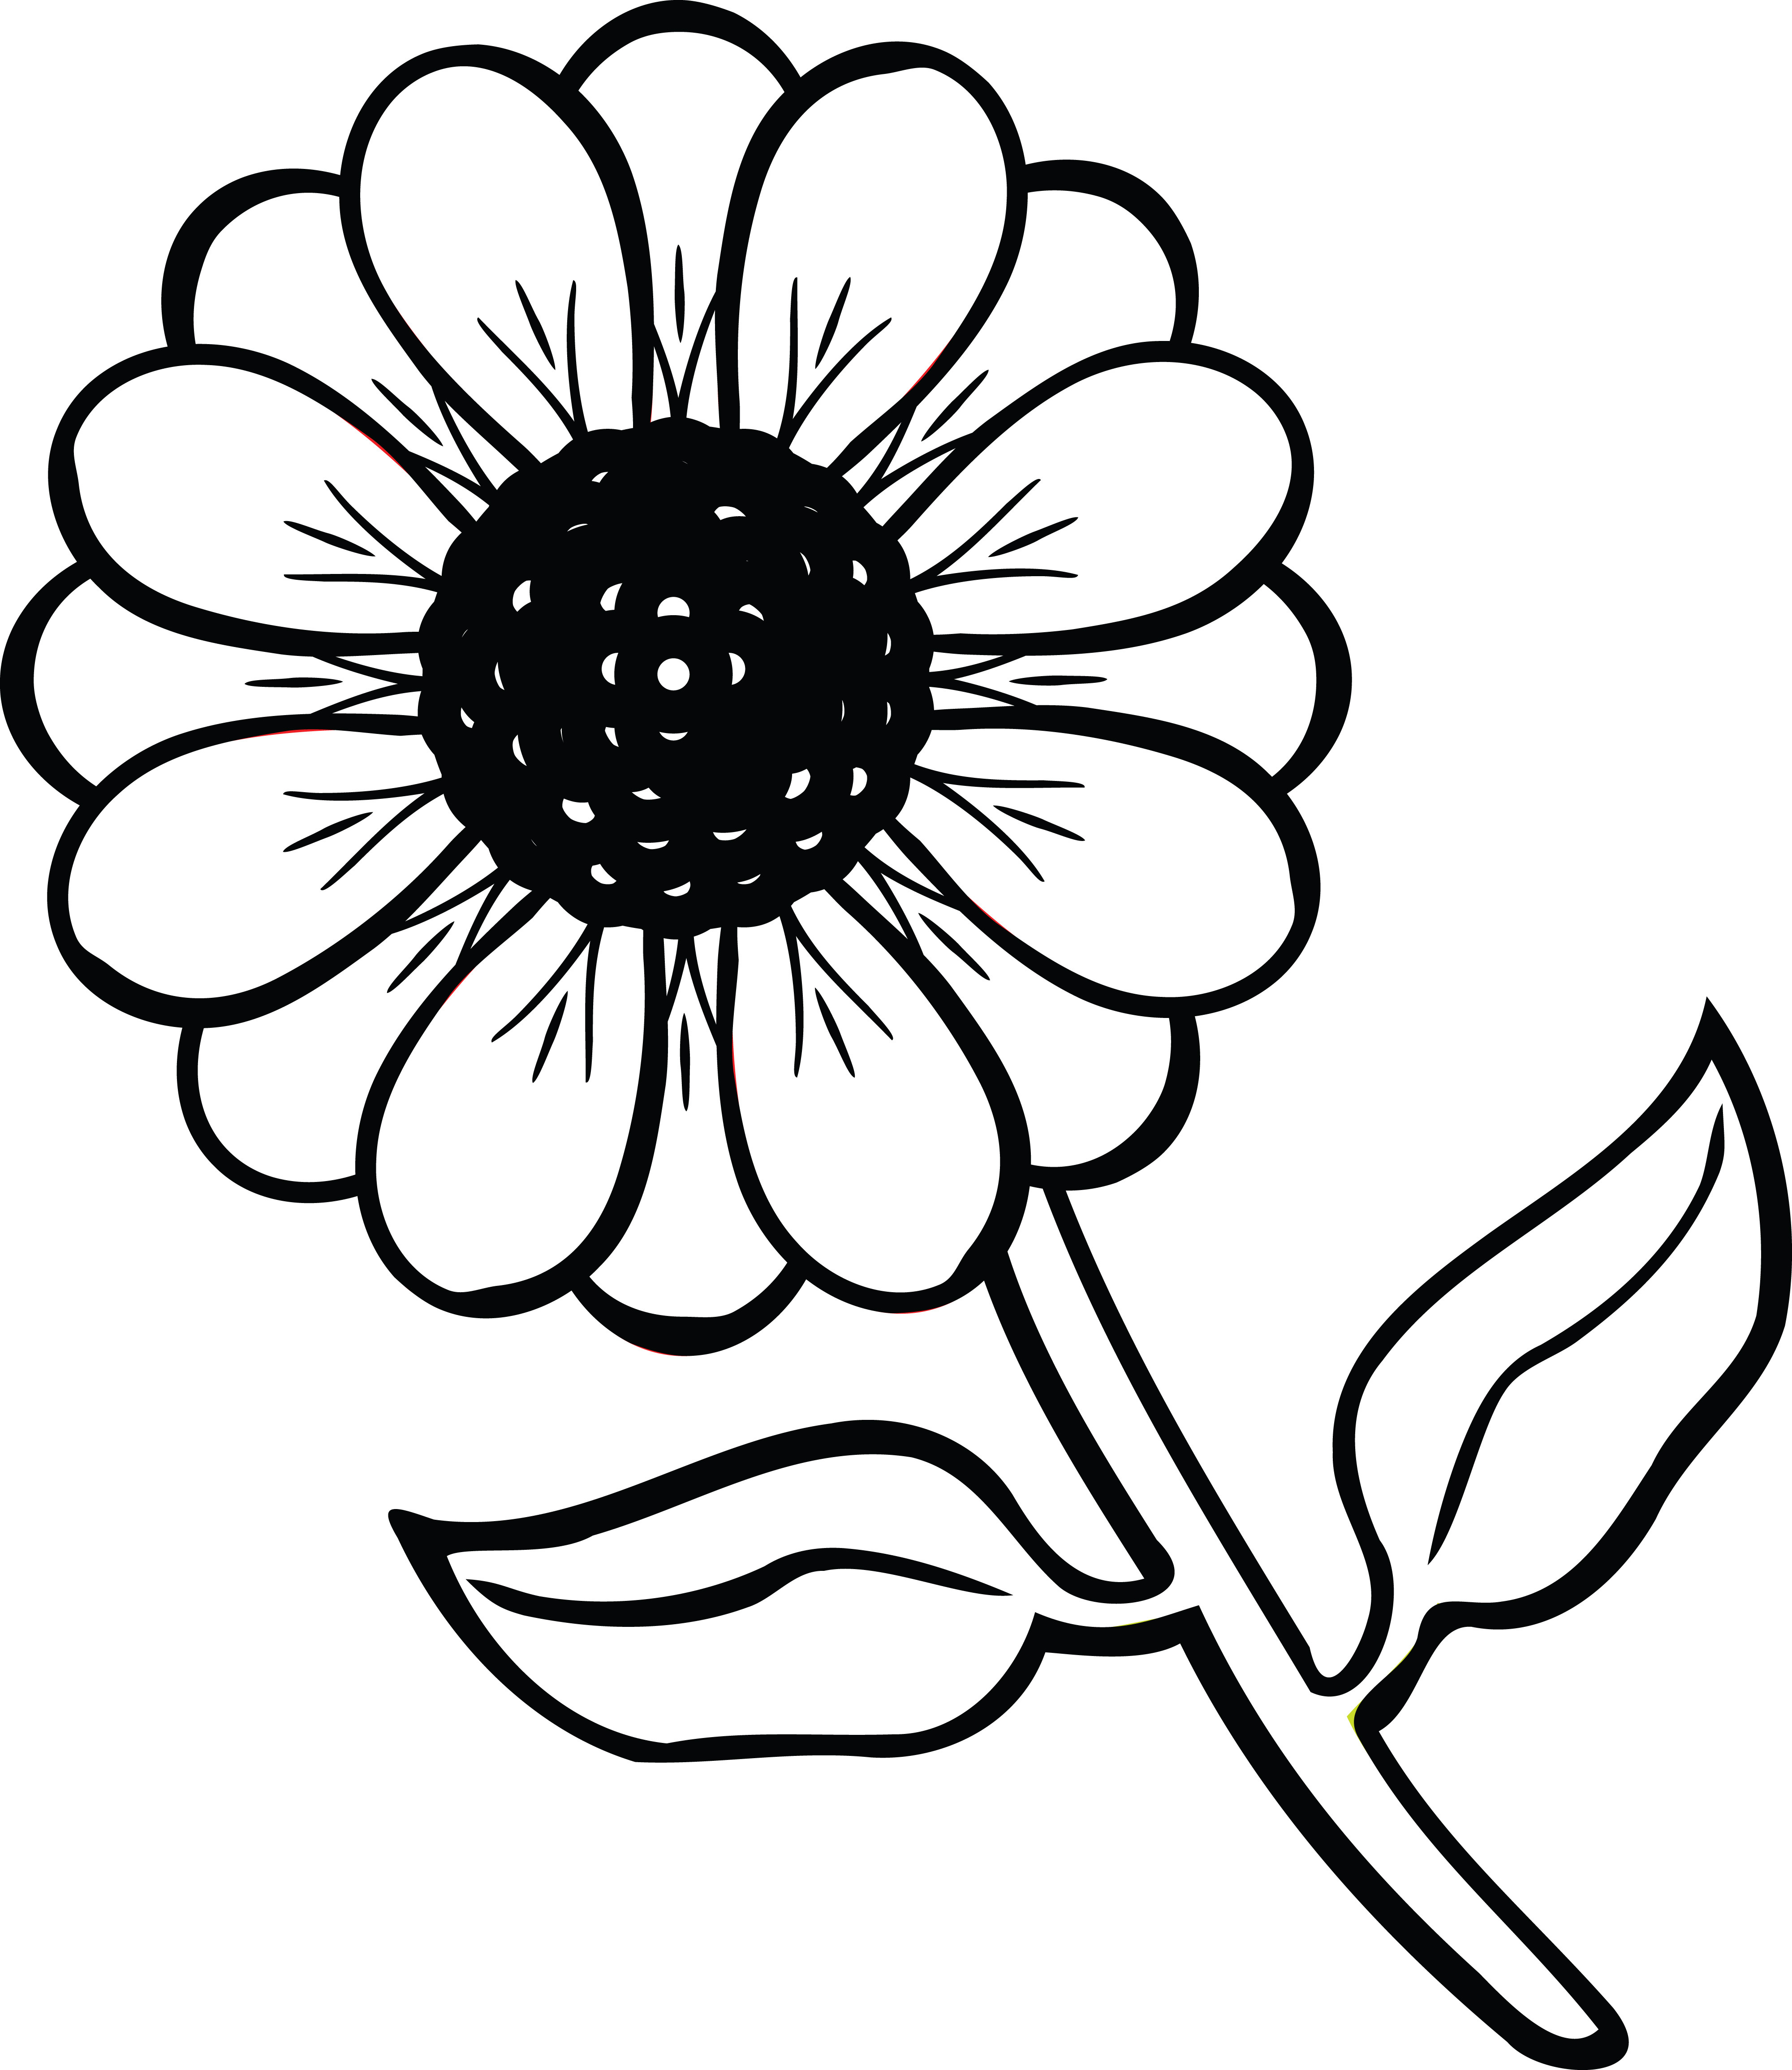 Printable Flower Clipart Black And White - Get Your Hands on Amazing ...